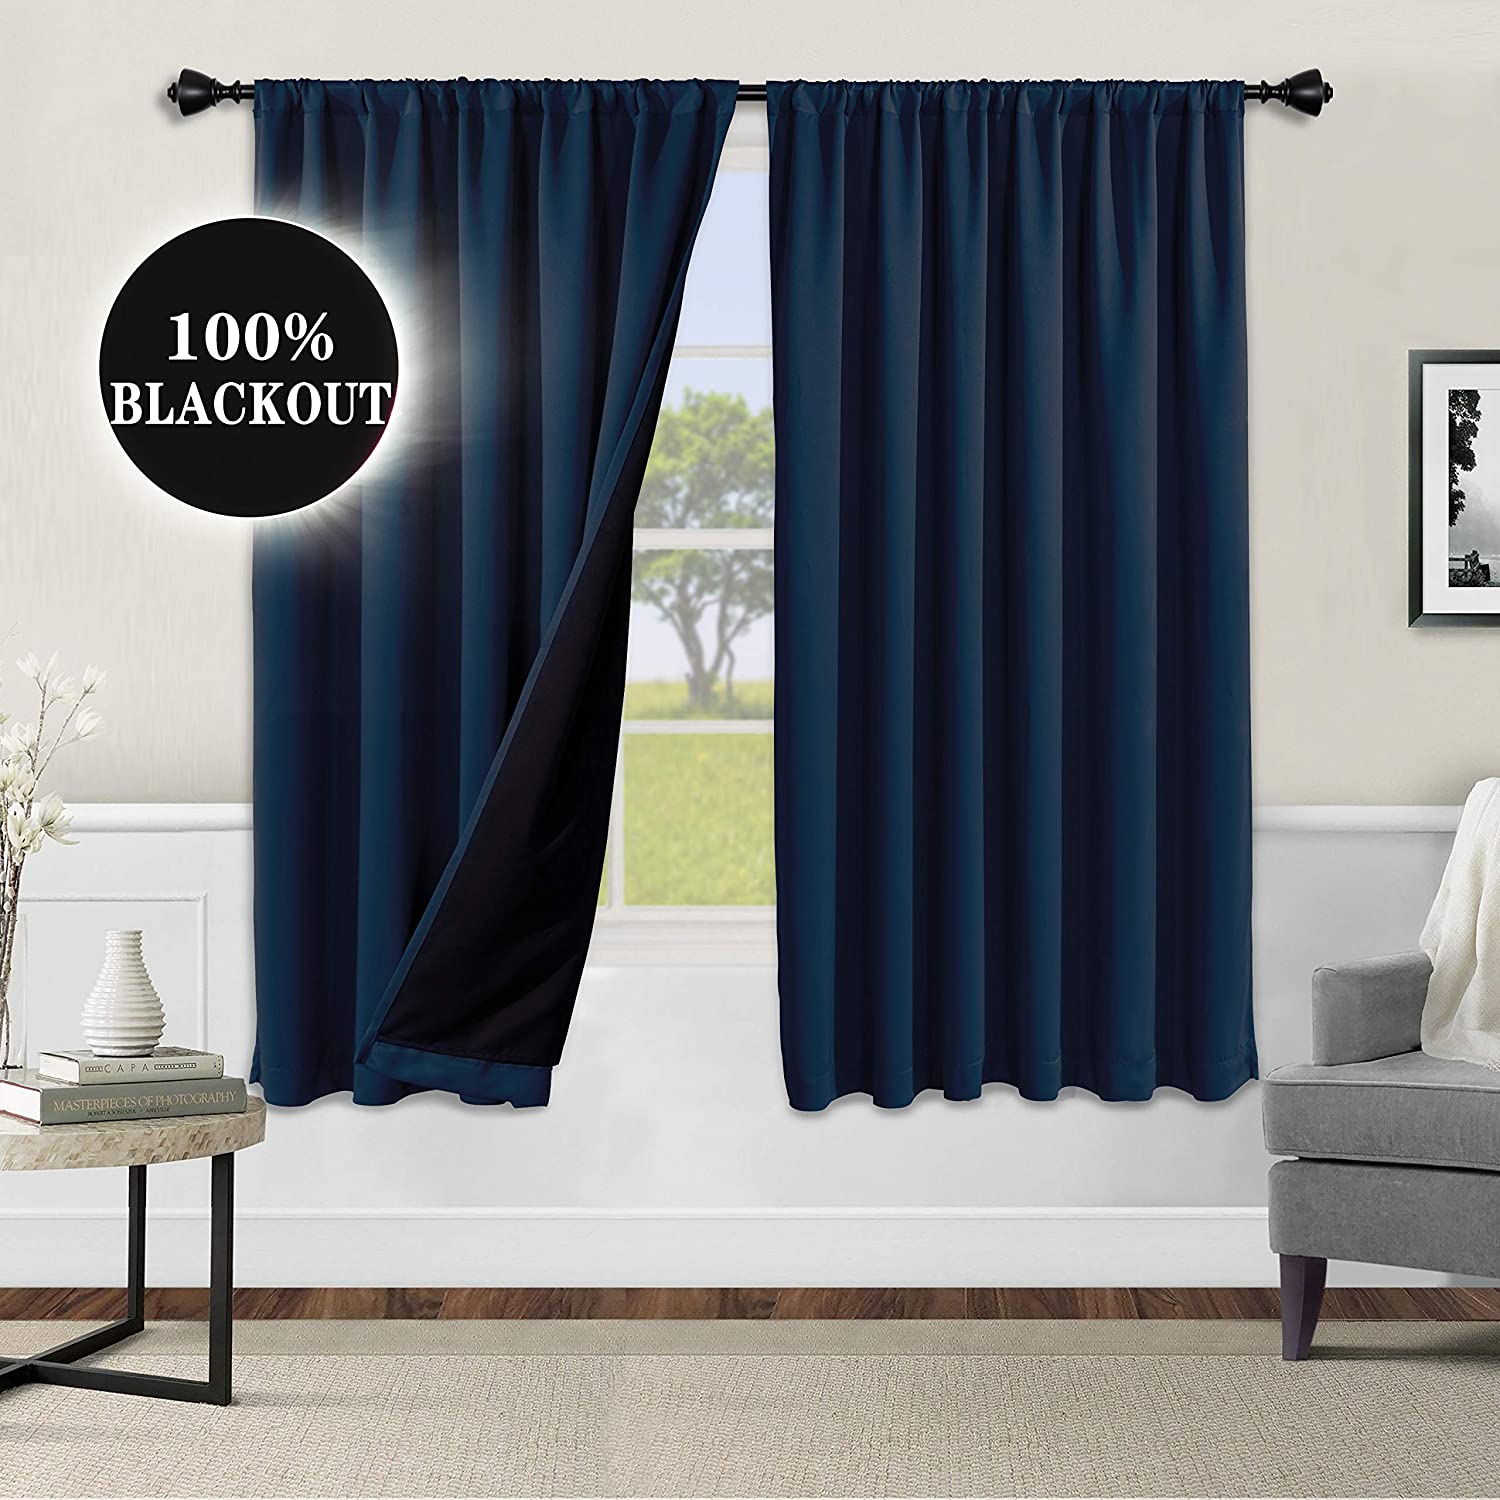 Super Soft Thermal Insulated Window Bedroom Curtains Blackout with Two Tie Backs 